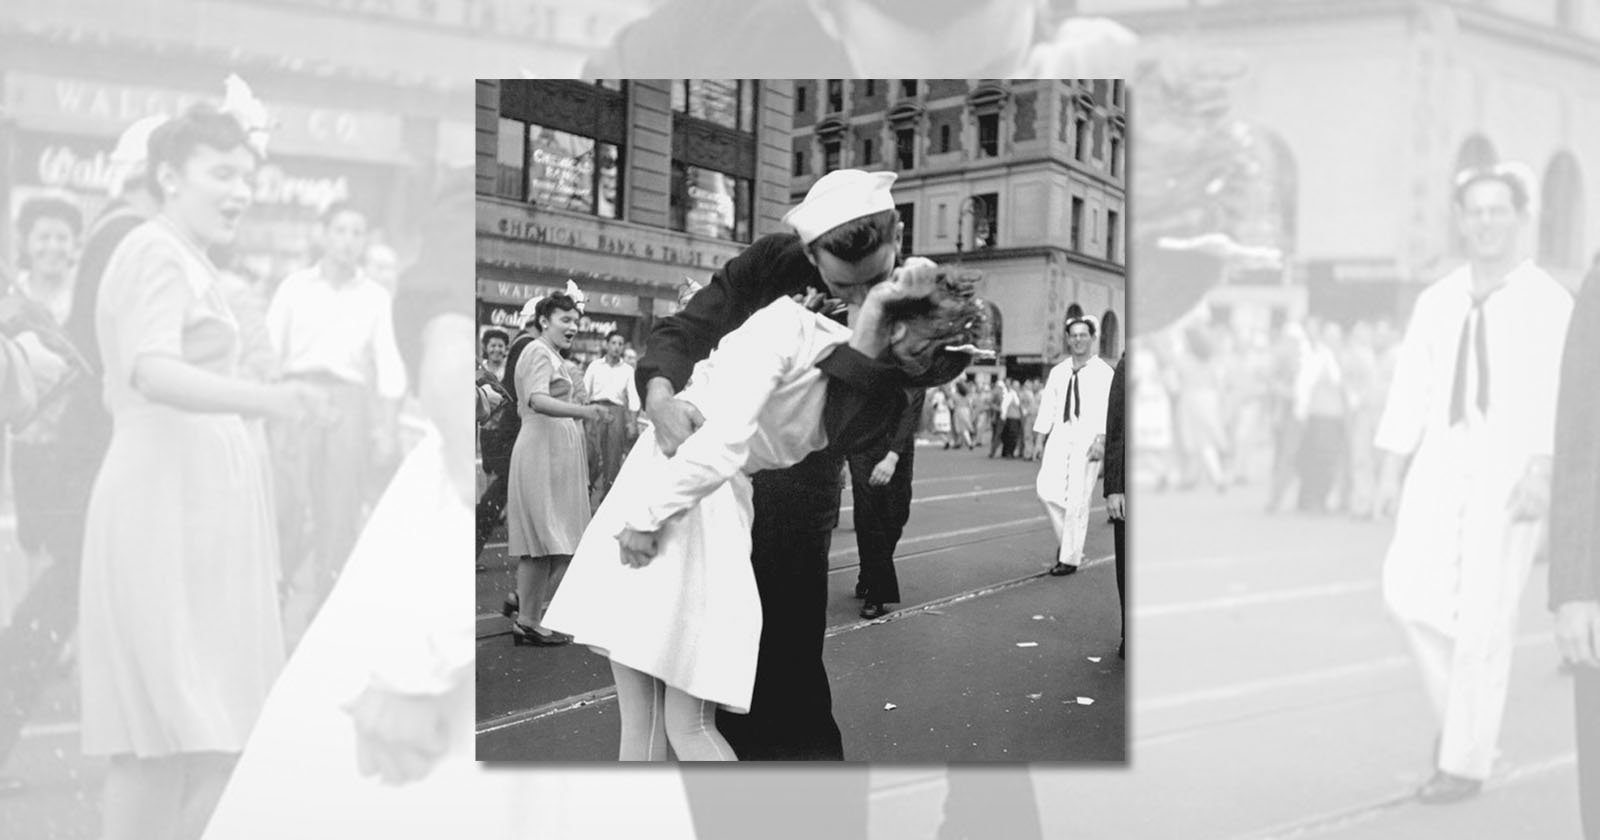 VJ-day in Times Square by Alfred Eisenstaedt